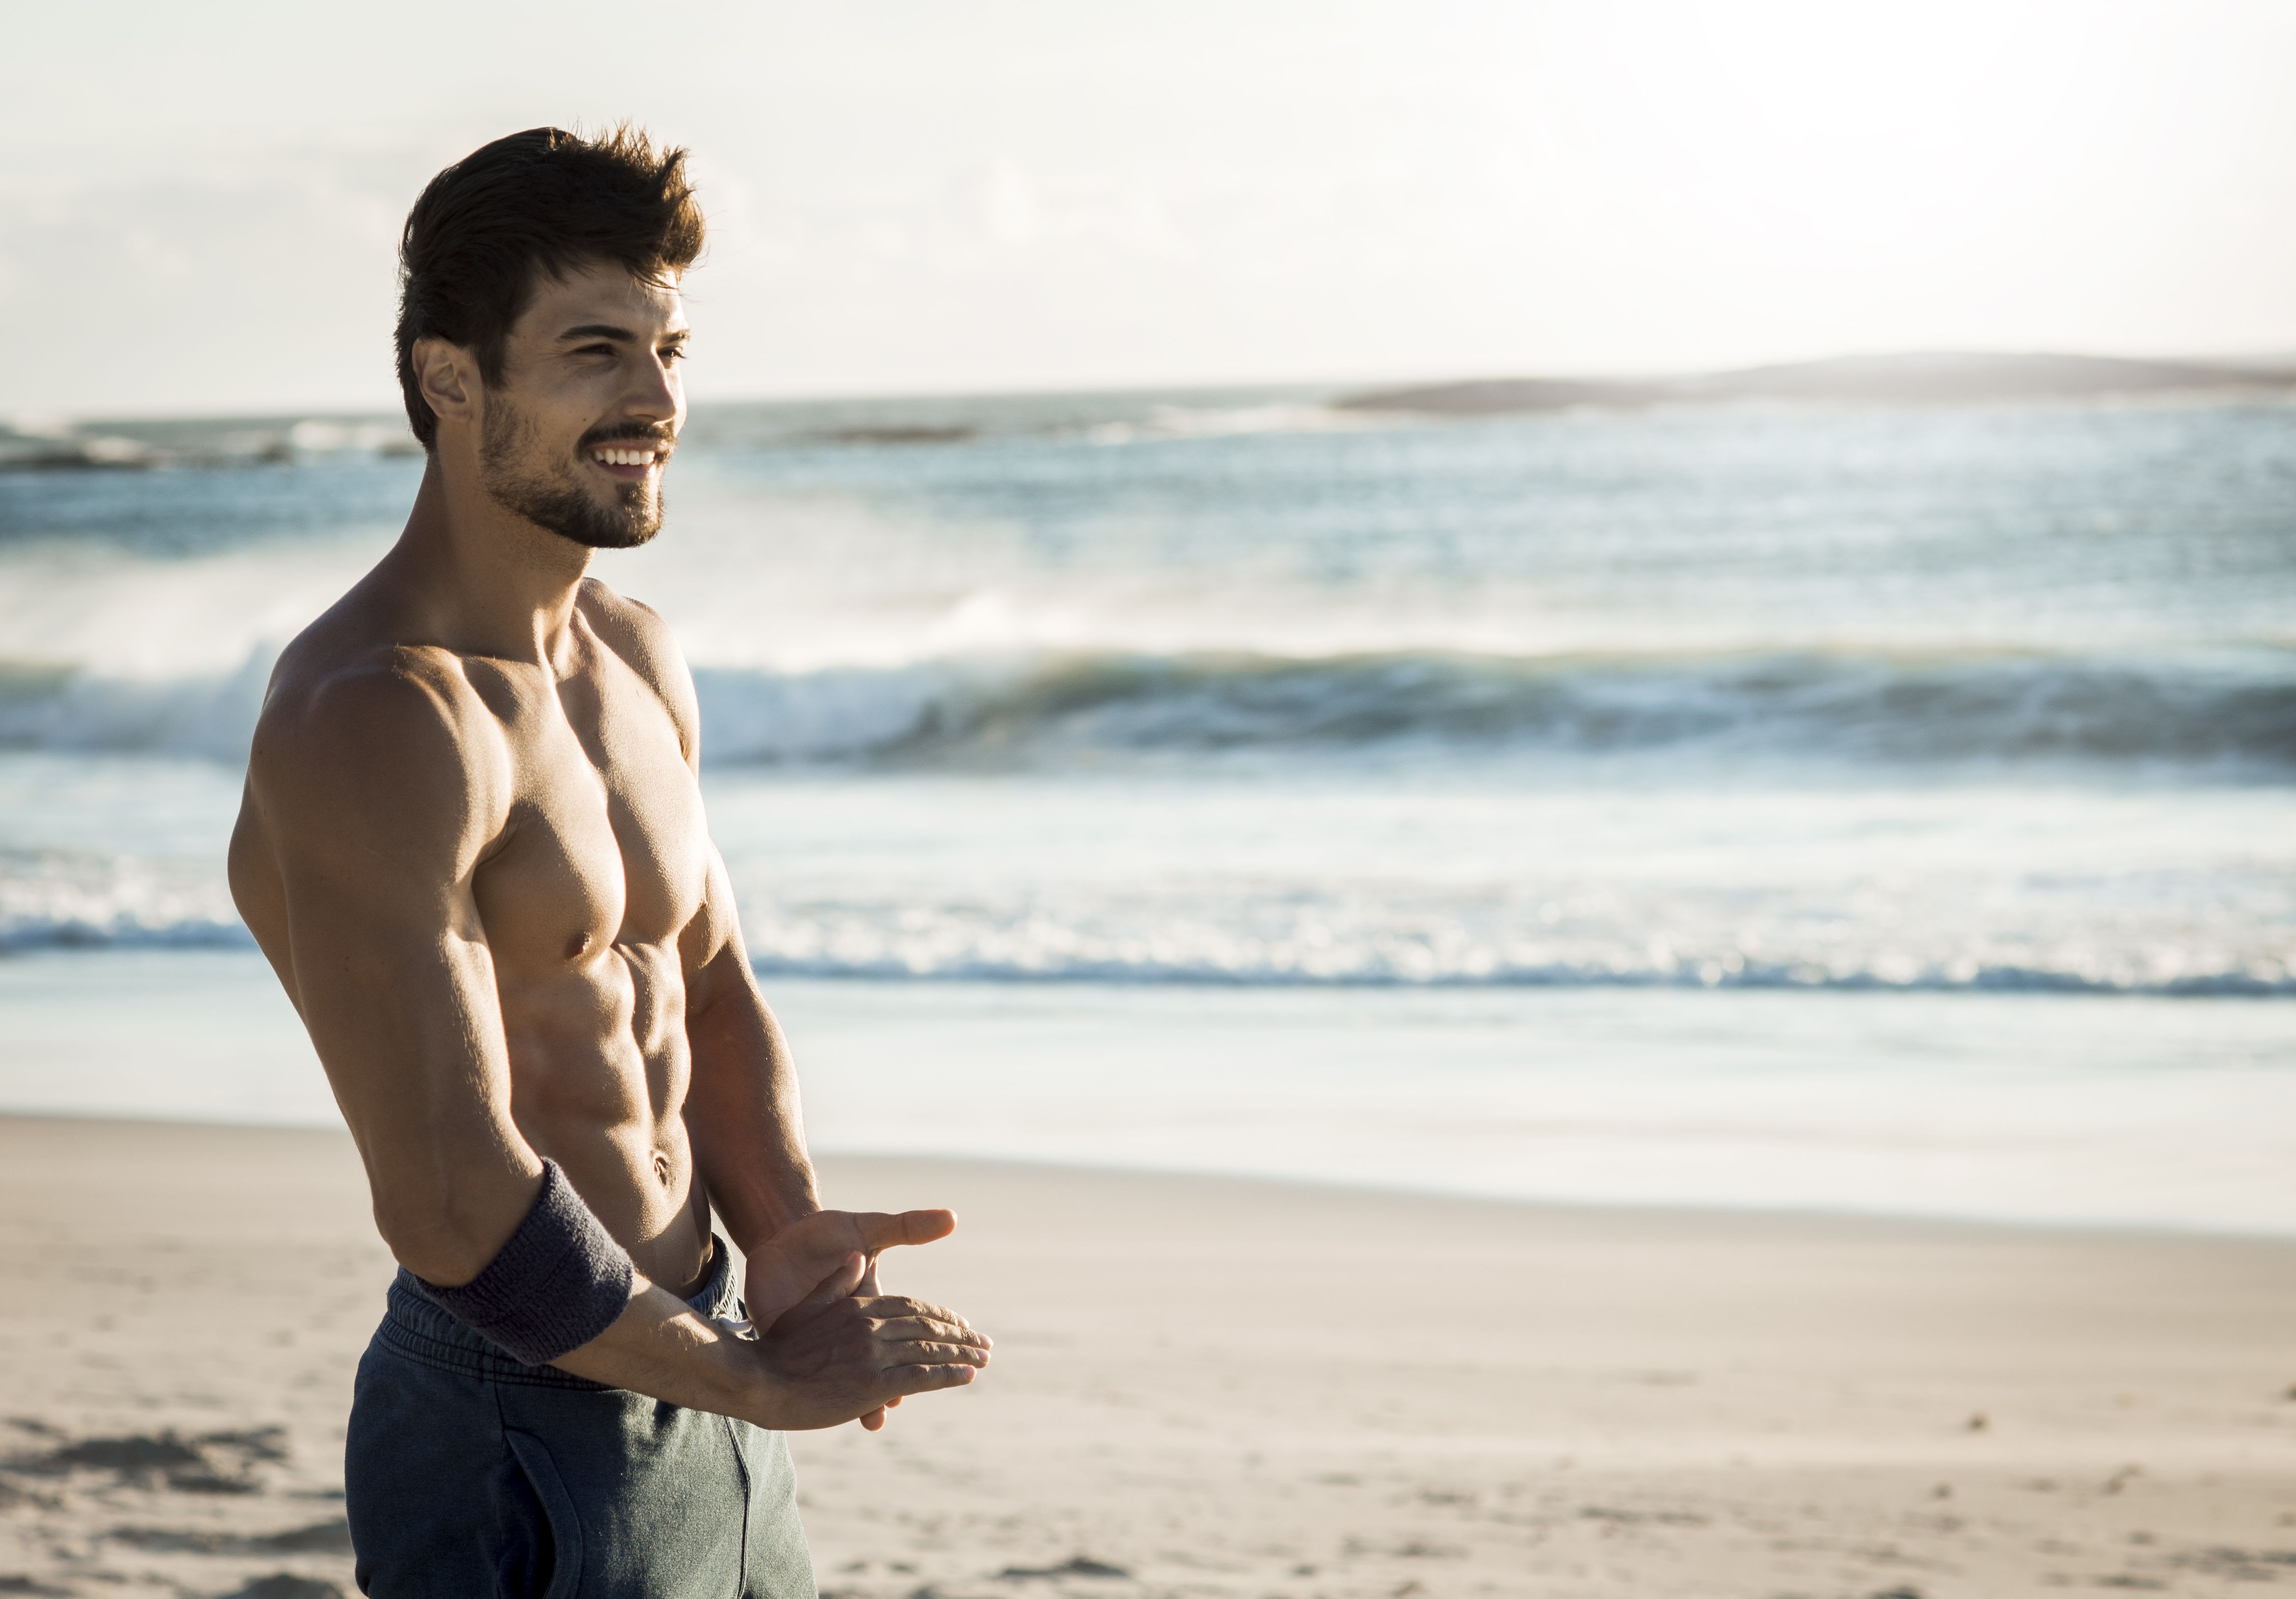 6 Abs Workout Moves to Build a Better Six-Pack for Summer Beaches